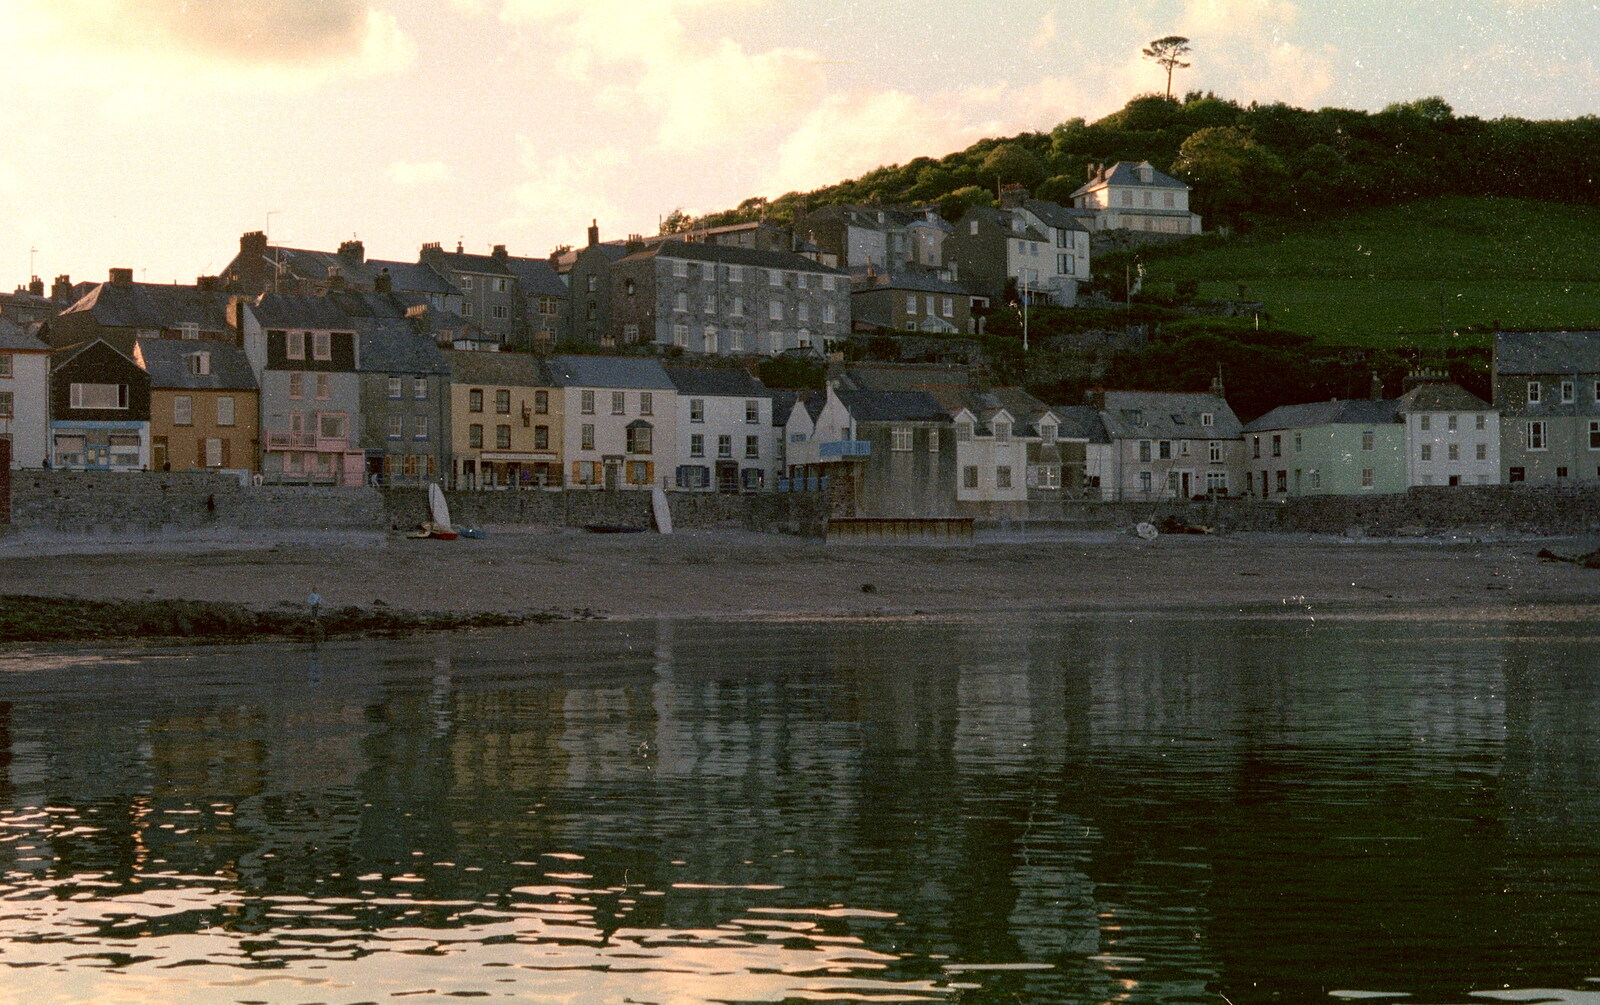 Another view of Cawsands from Uni: A Student Booze Cruise, Plymouth Sound, Devon - 2nd May 1986